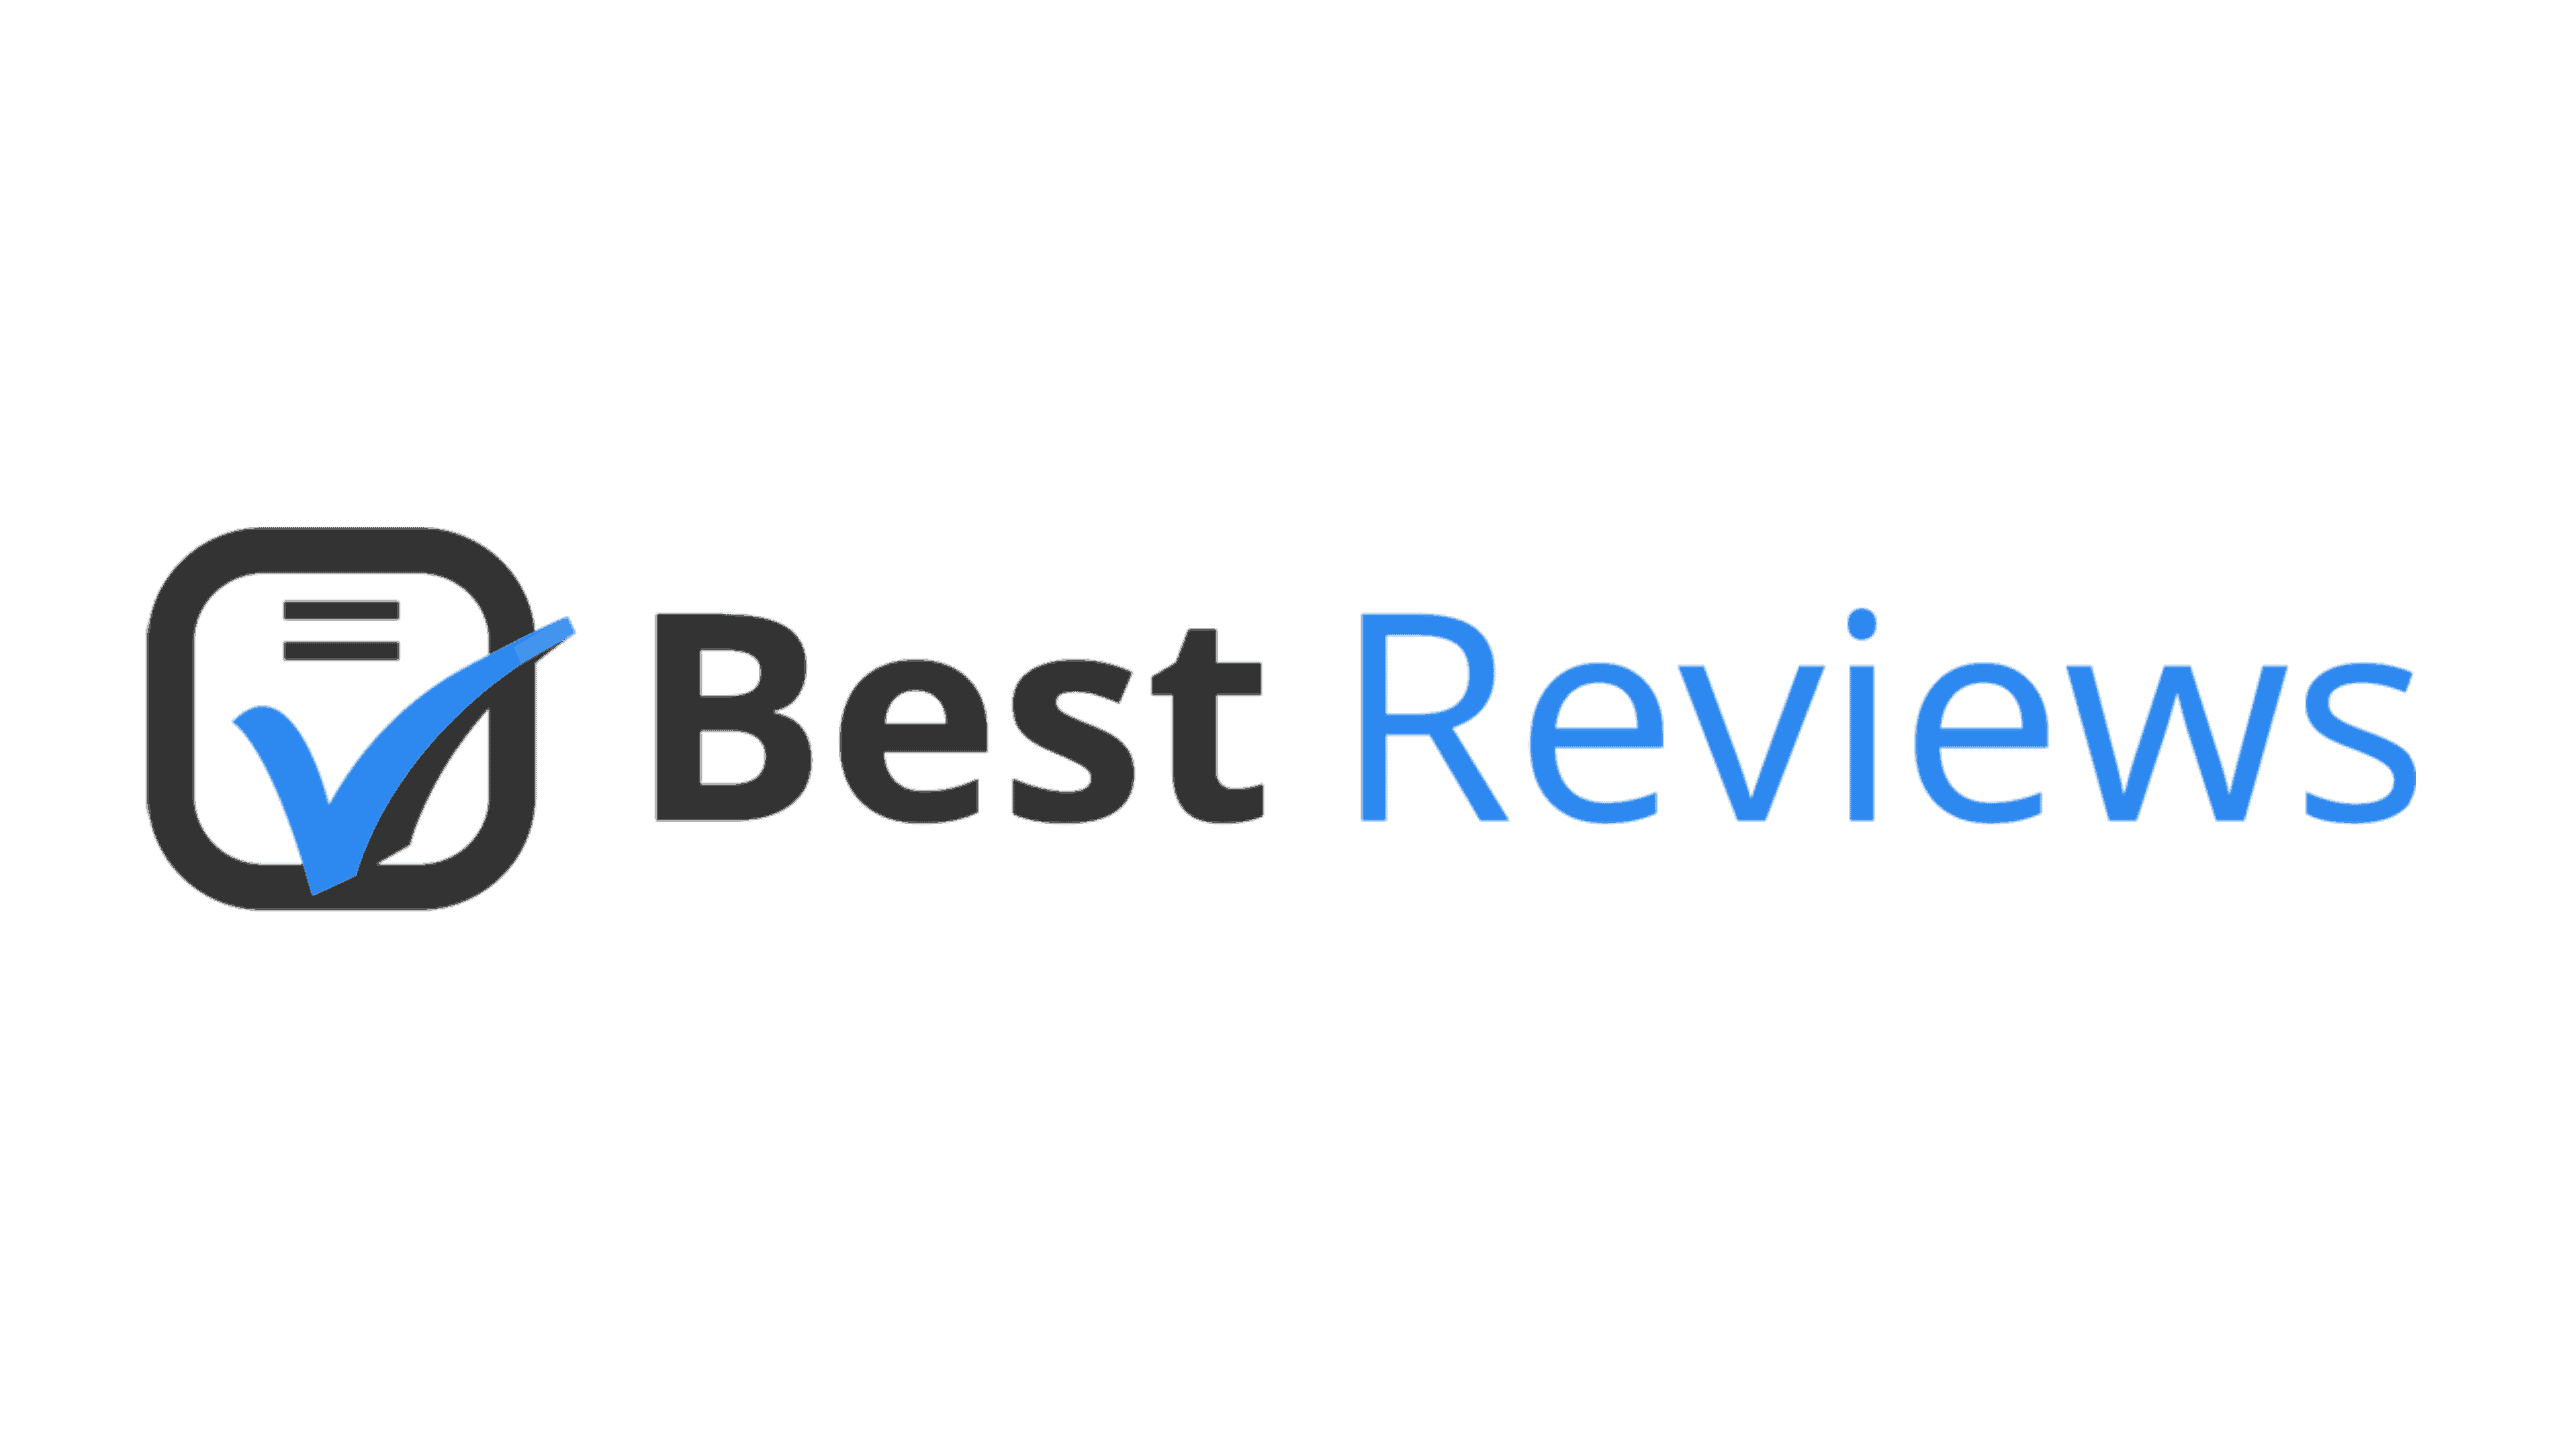 Yes, You Can Post That Negative Online Review, Says Congress